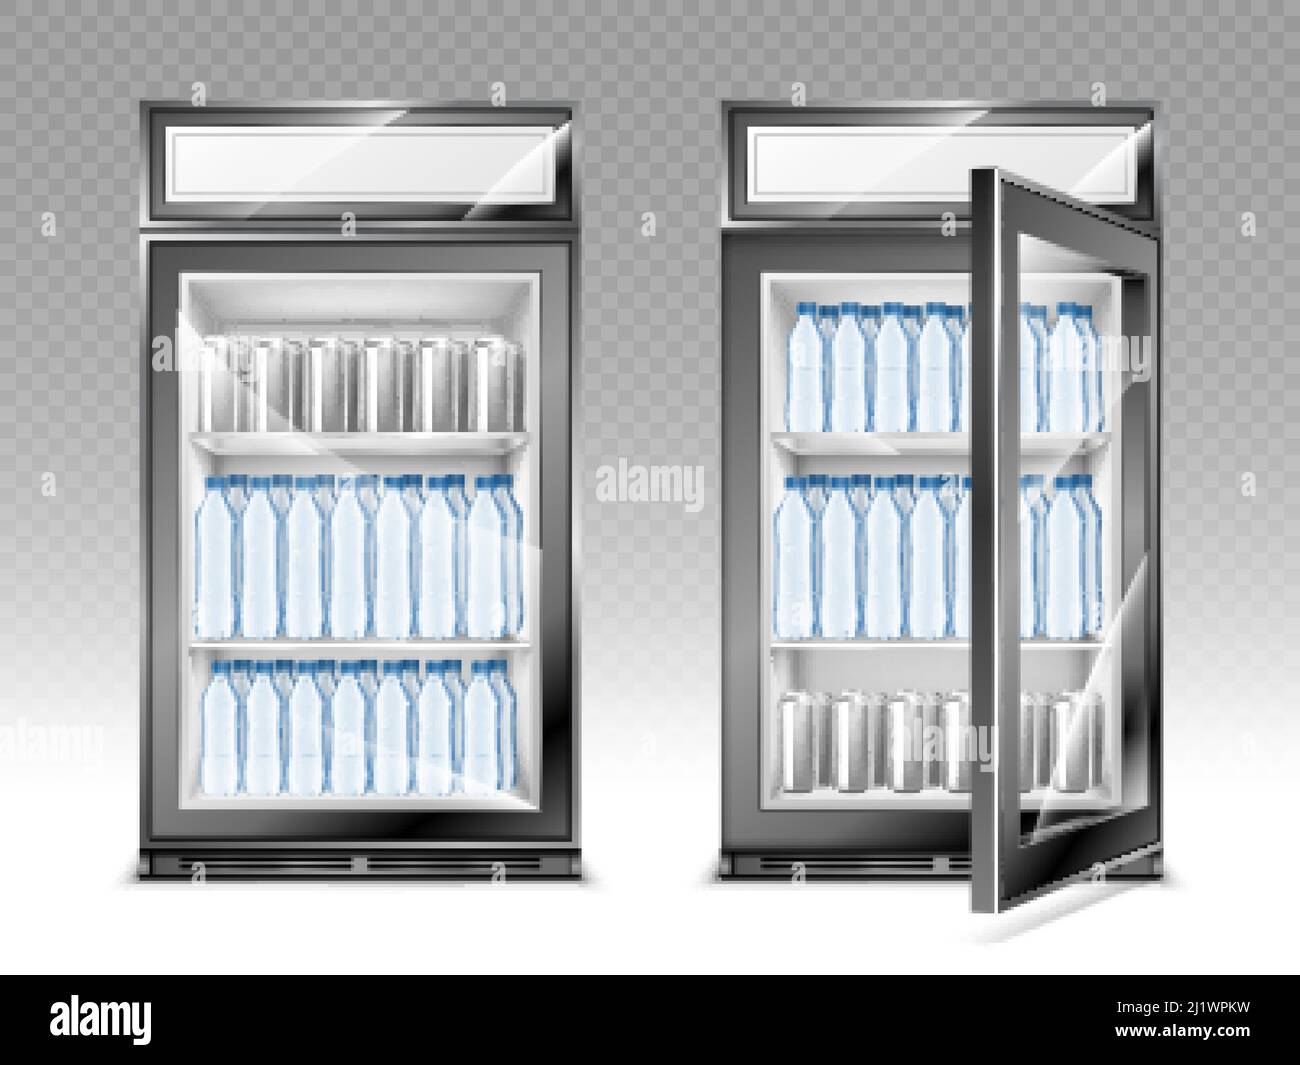 Mini refrigerator with water bottles and beverages, fridge with advertising digital display and transparent close and open glass door. Realistic 3d ve Stock Vector